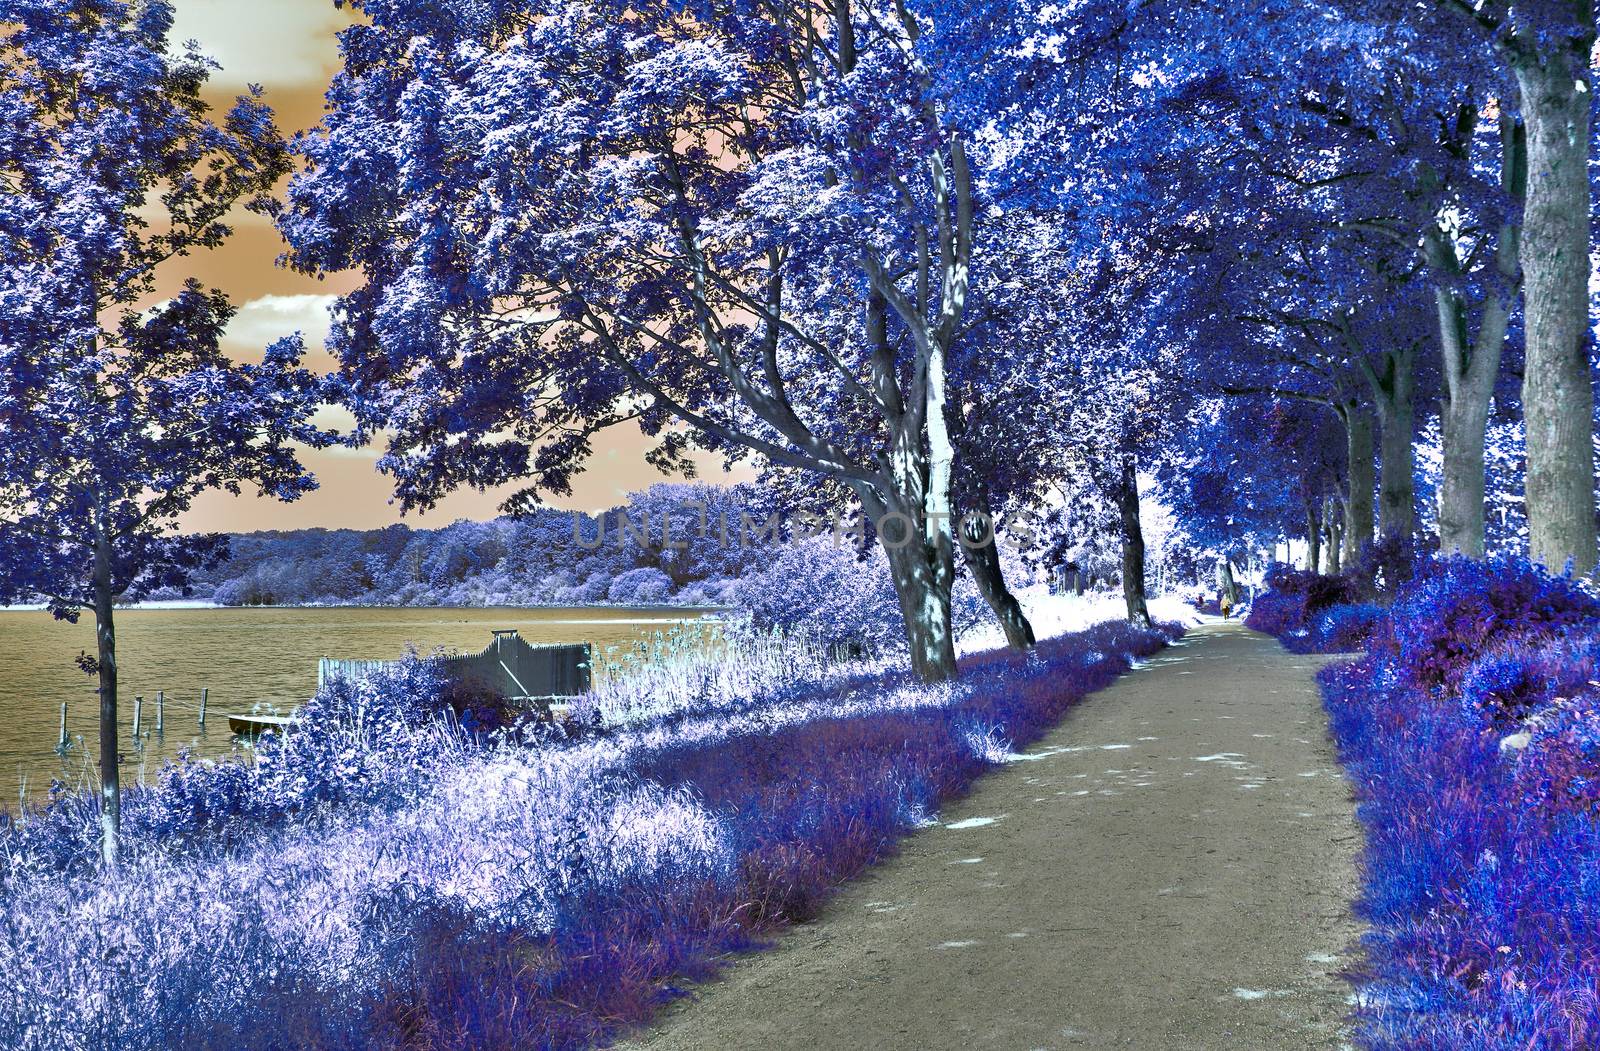 Beautiful purple infrared landscape with a magical look in high resolution